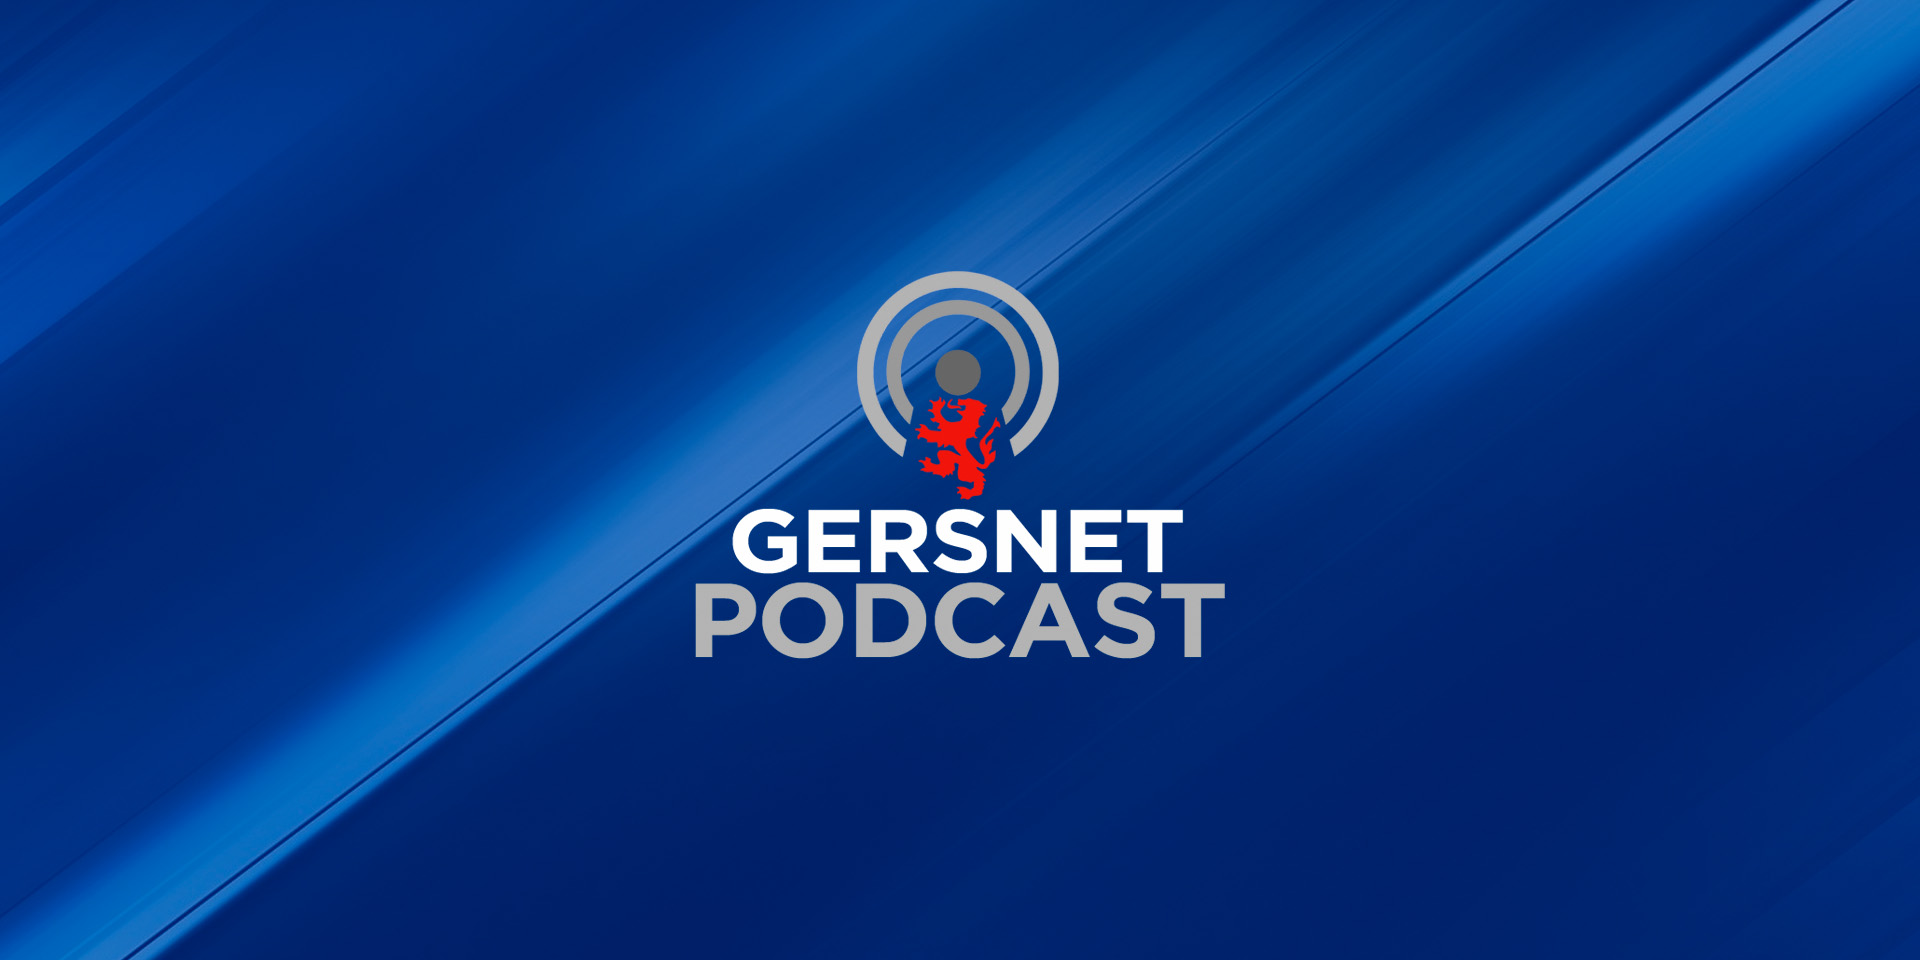 Gersnet Podcast 265 - If anyone can, Cantwell can